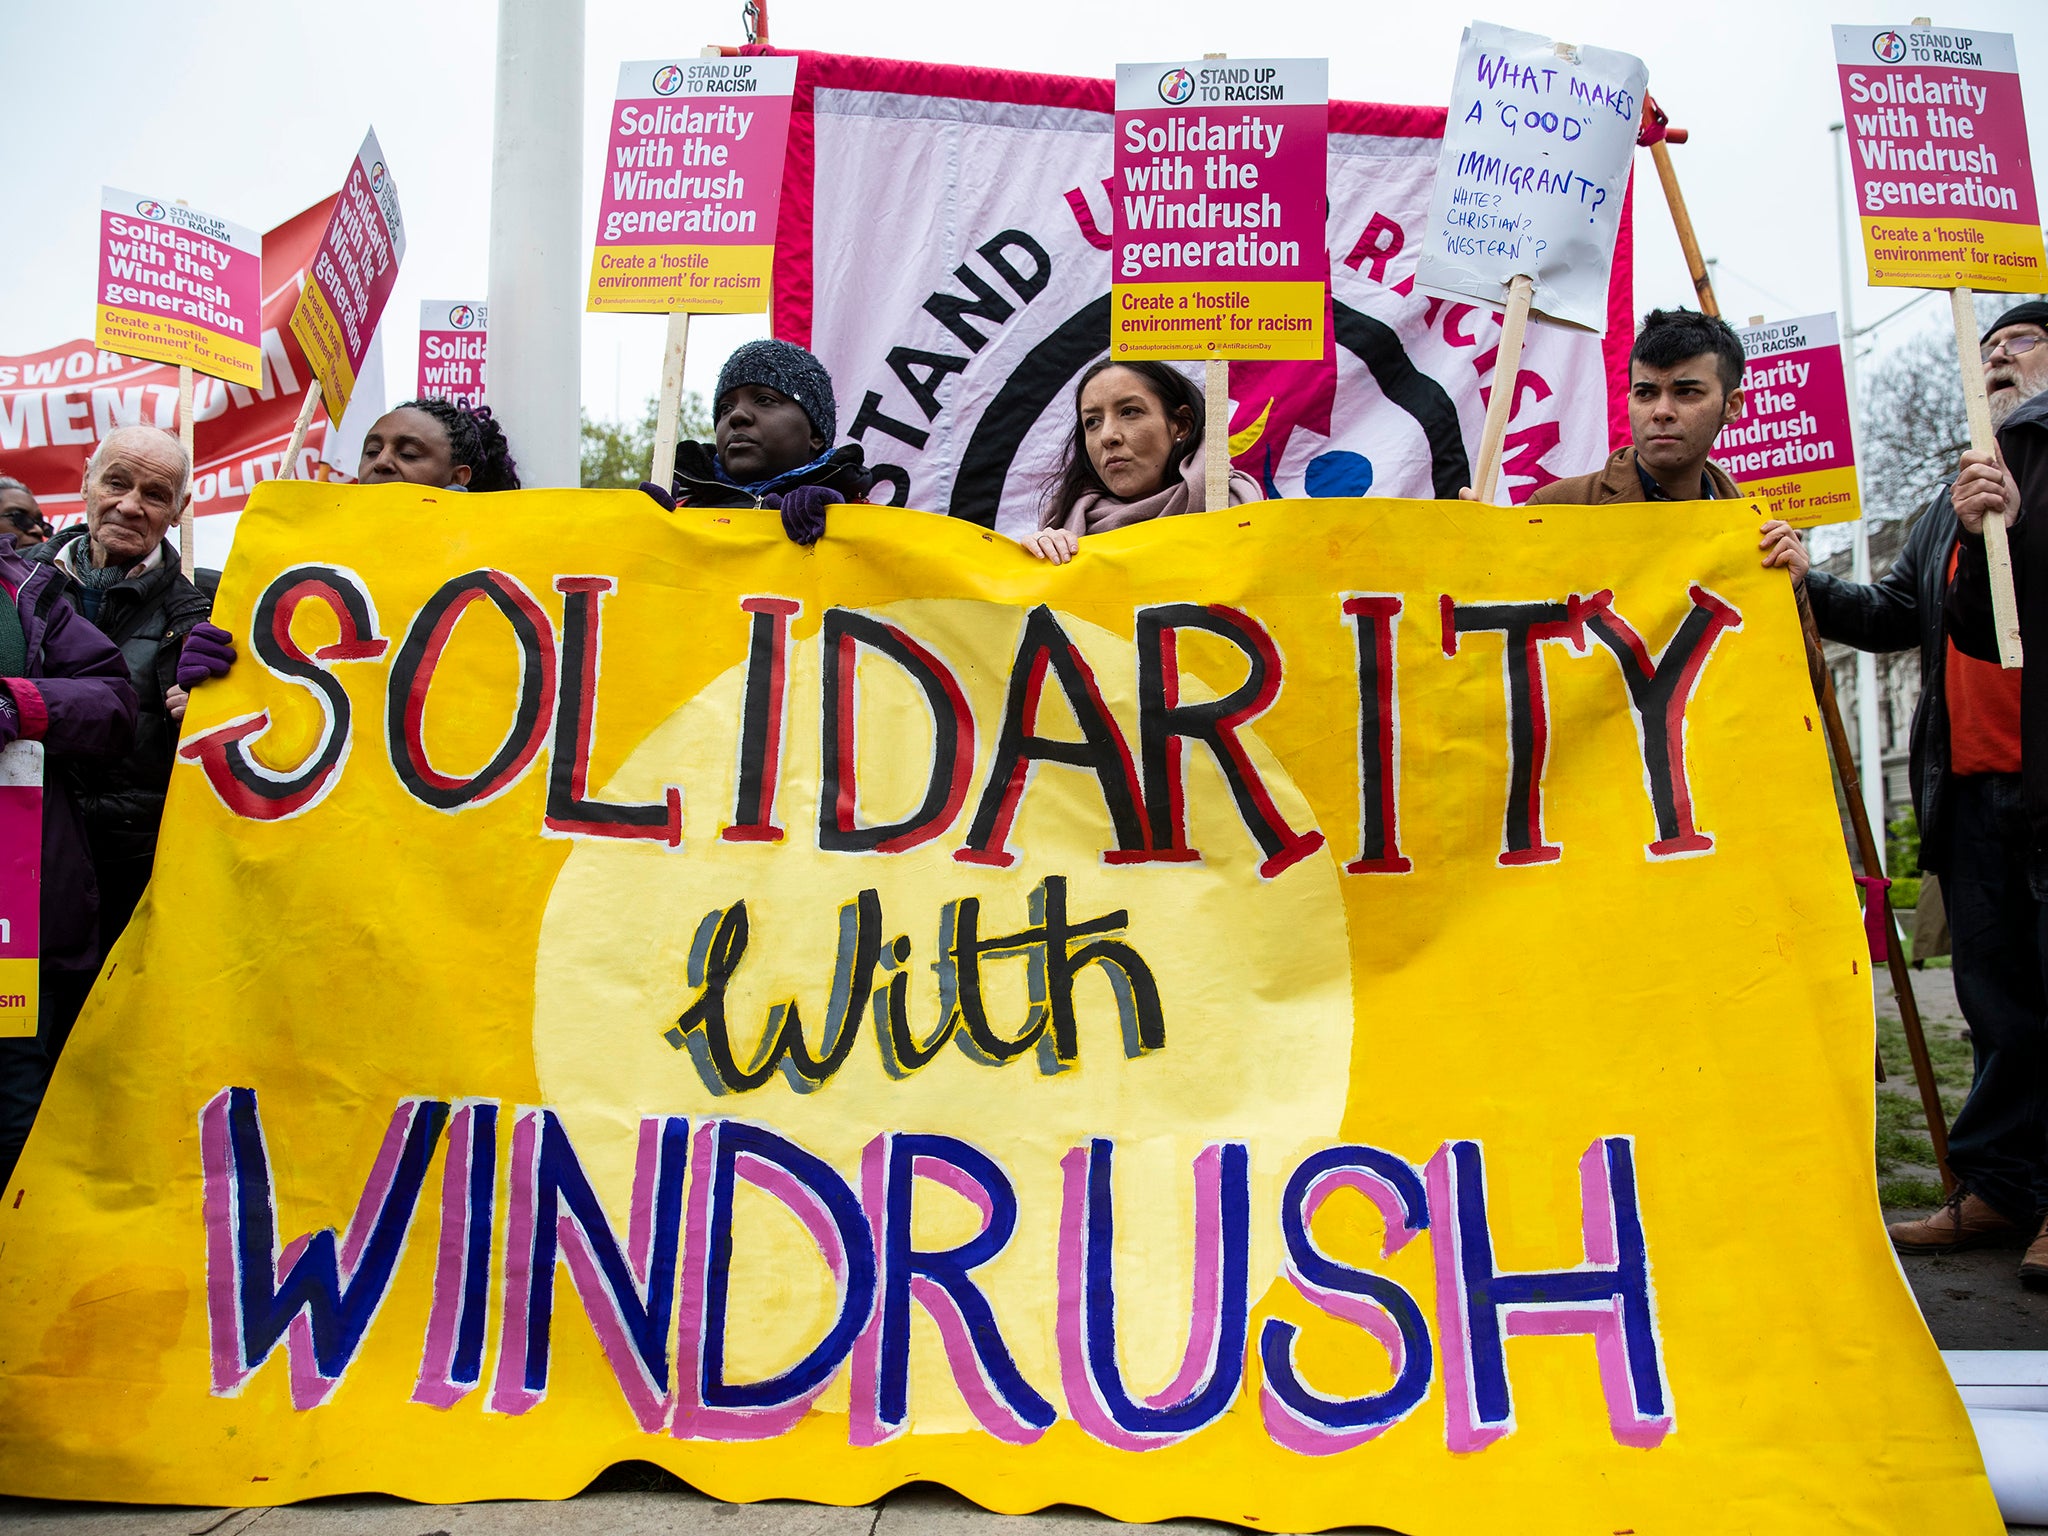 Protesters gather in Parliament Square to demonstrate about the ongoing Windrush migrant scandal